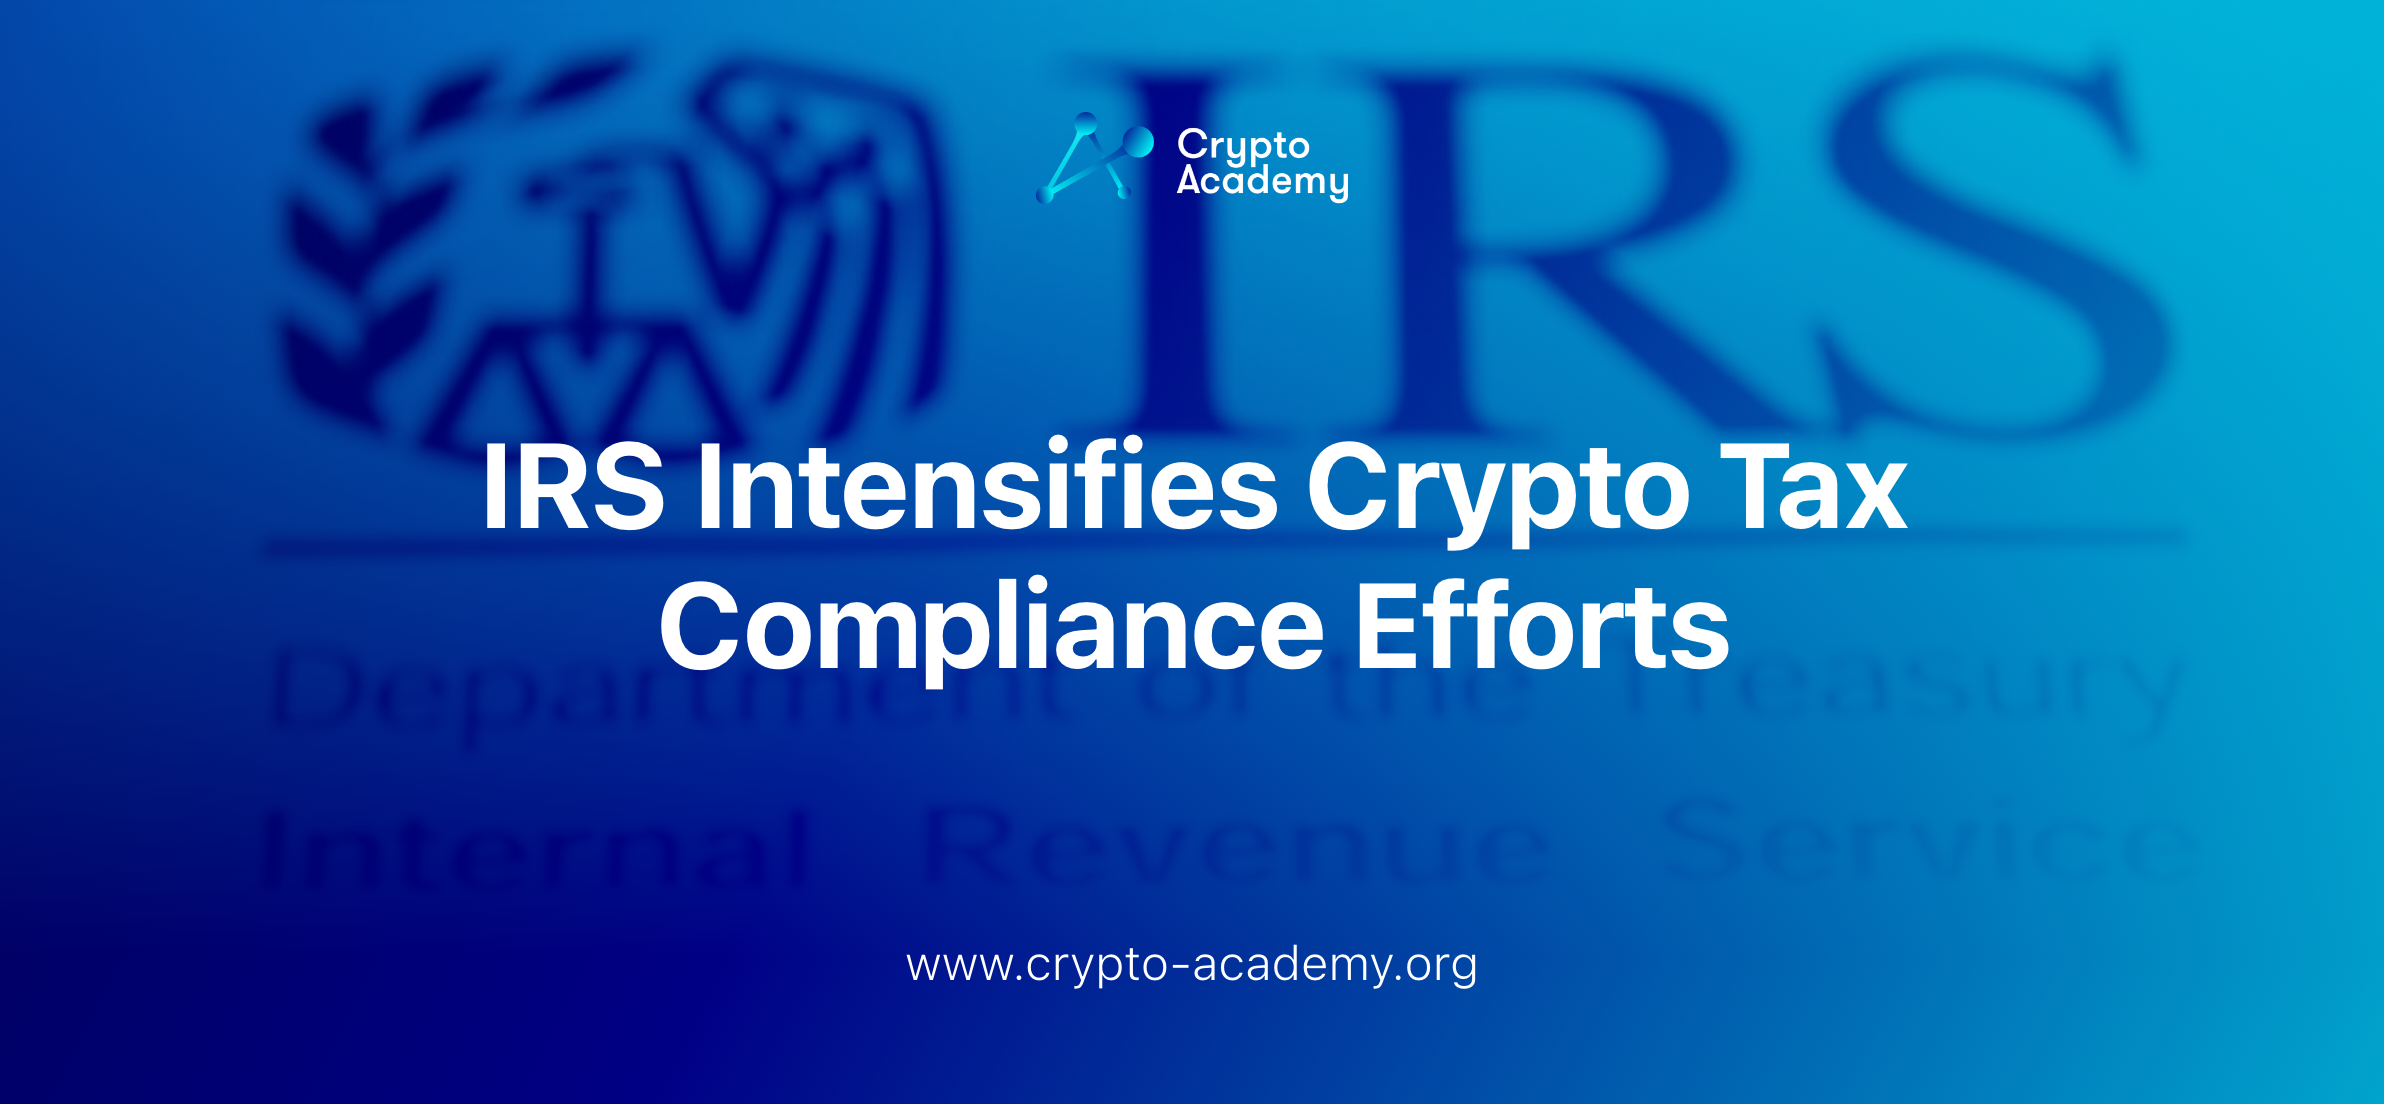 IRS Intensifies Crypto Tax Compliance Efforts